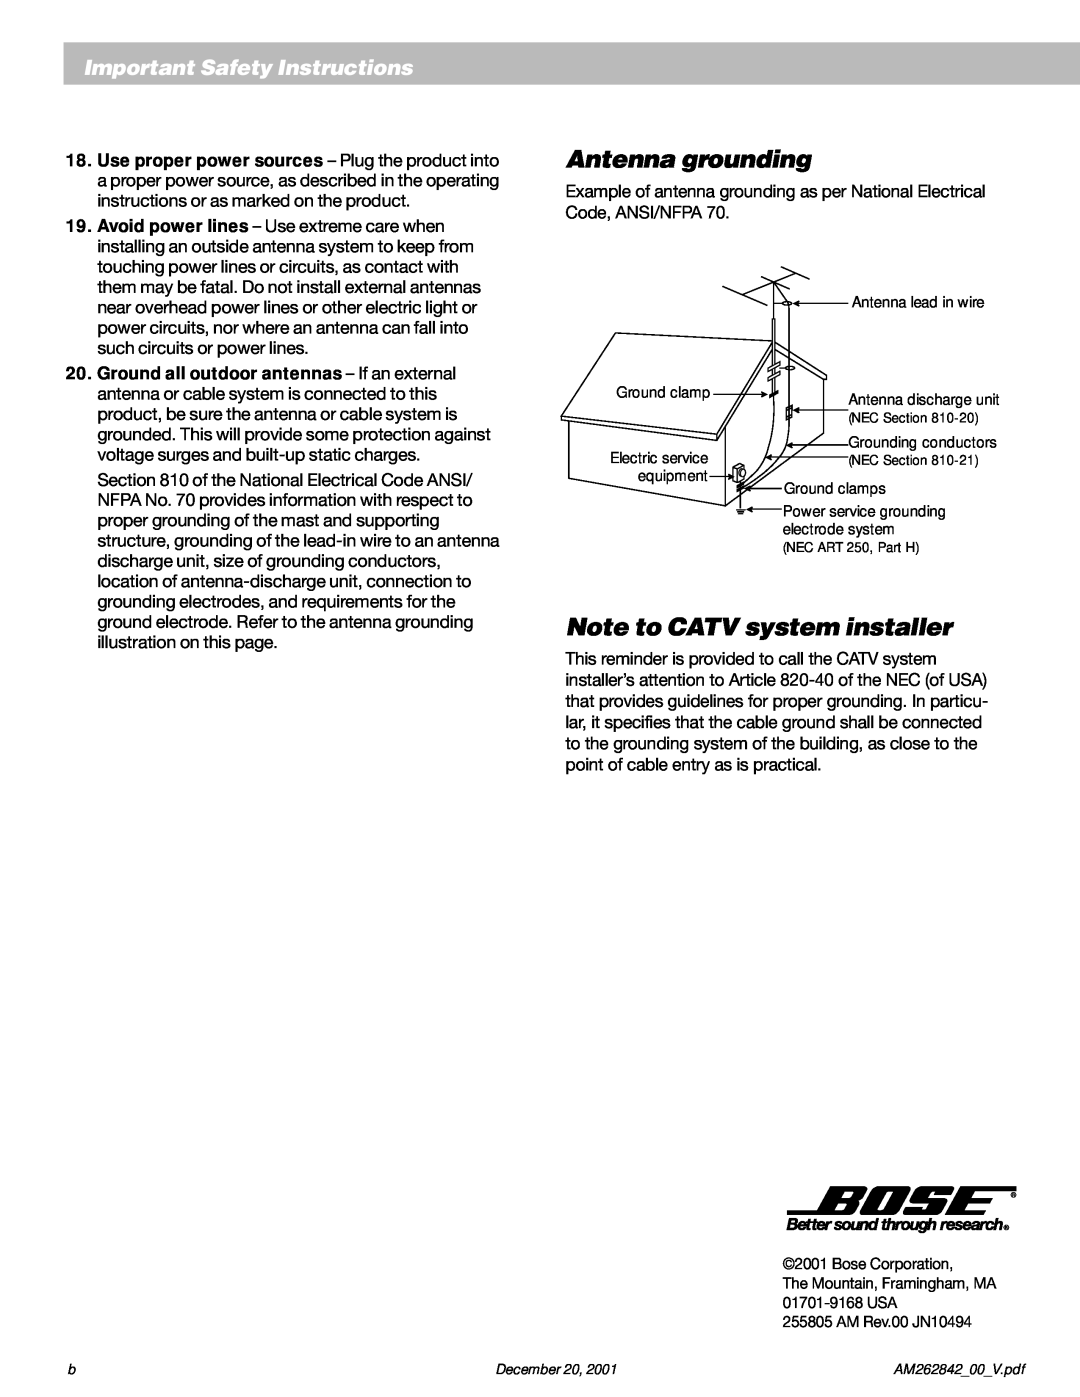 Bose Surround Sound Speaker System manual Antenna grounding, Note to CATV system installer, Important Safety Instructions 